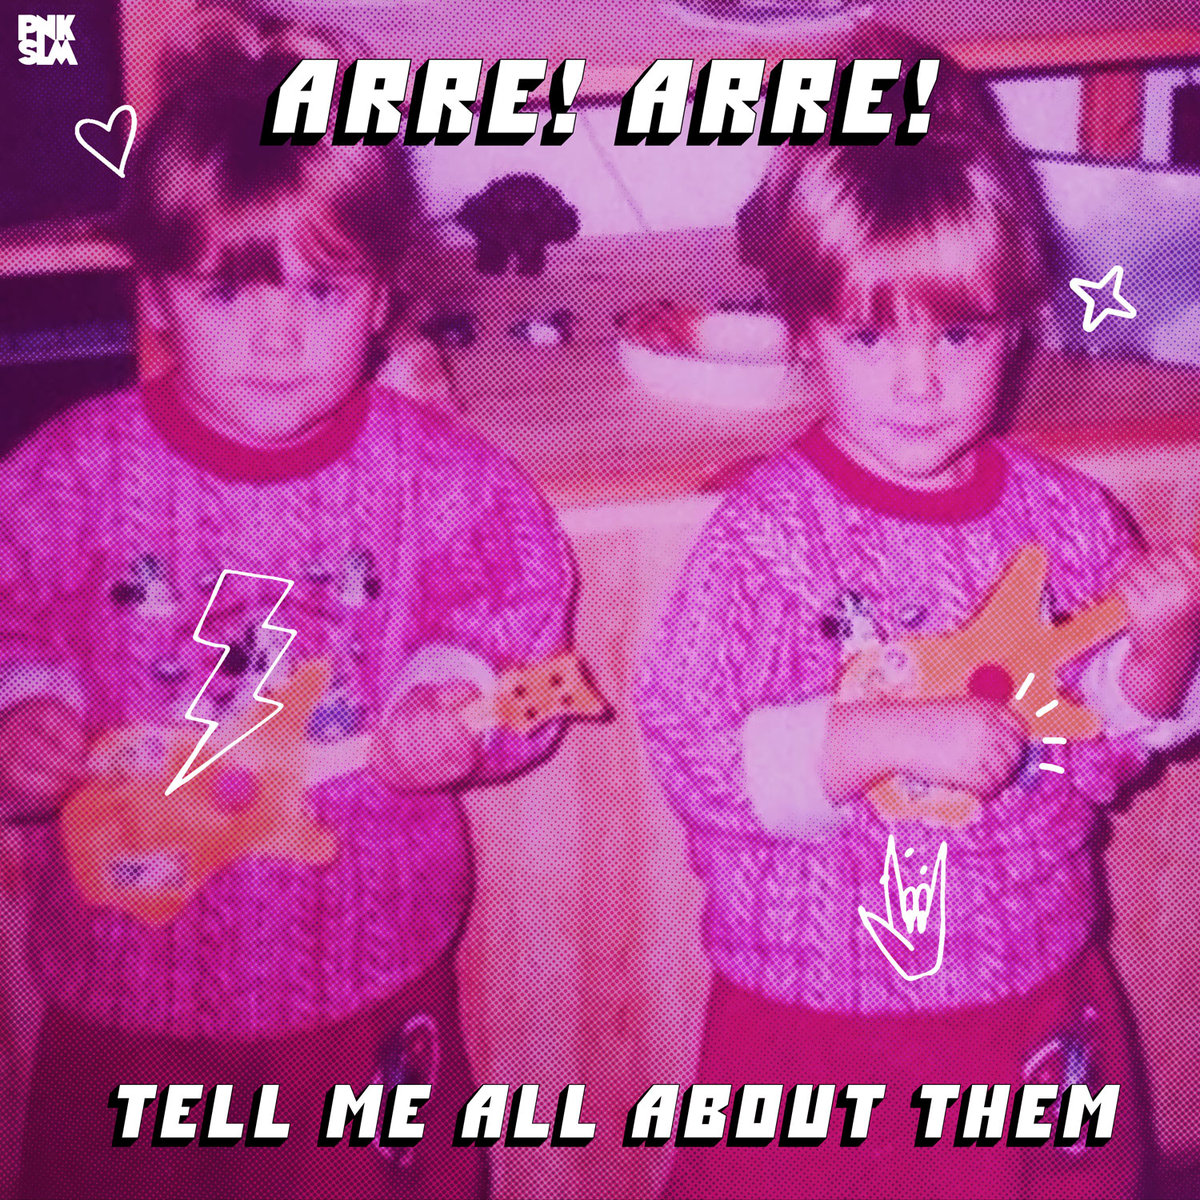 Arre! Arre! — Tell Me All About Them